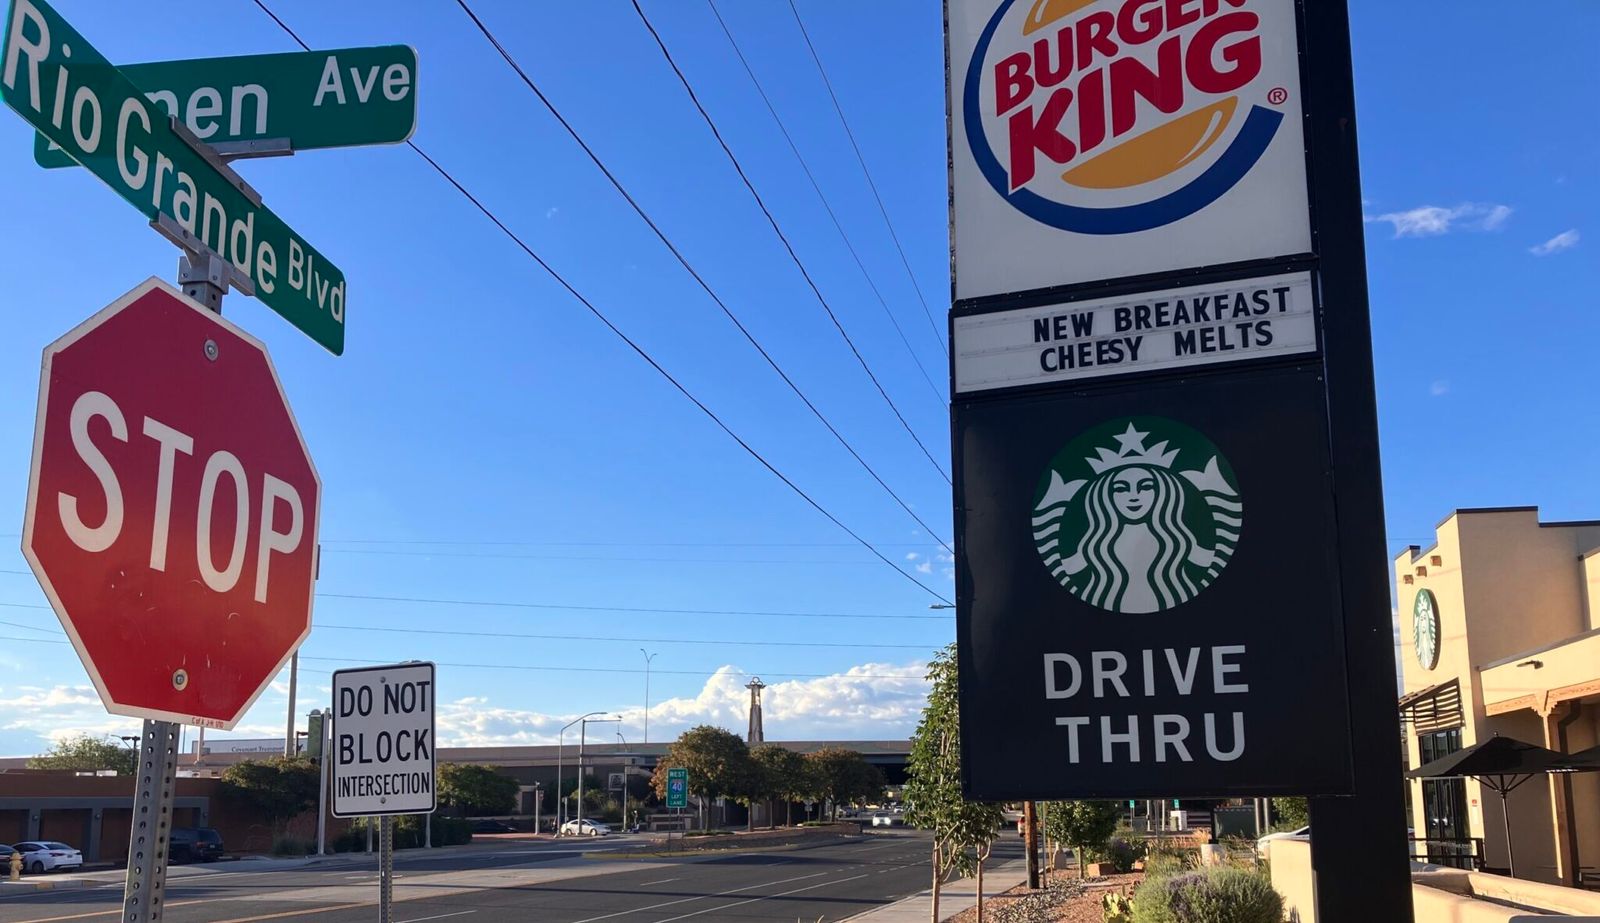 With two Starbucks stores in New Mexico set to unionize, organizers feel solidarity